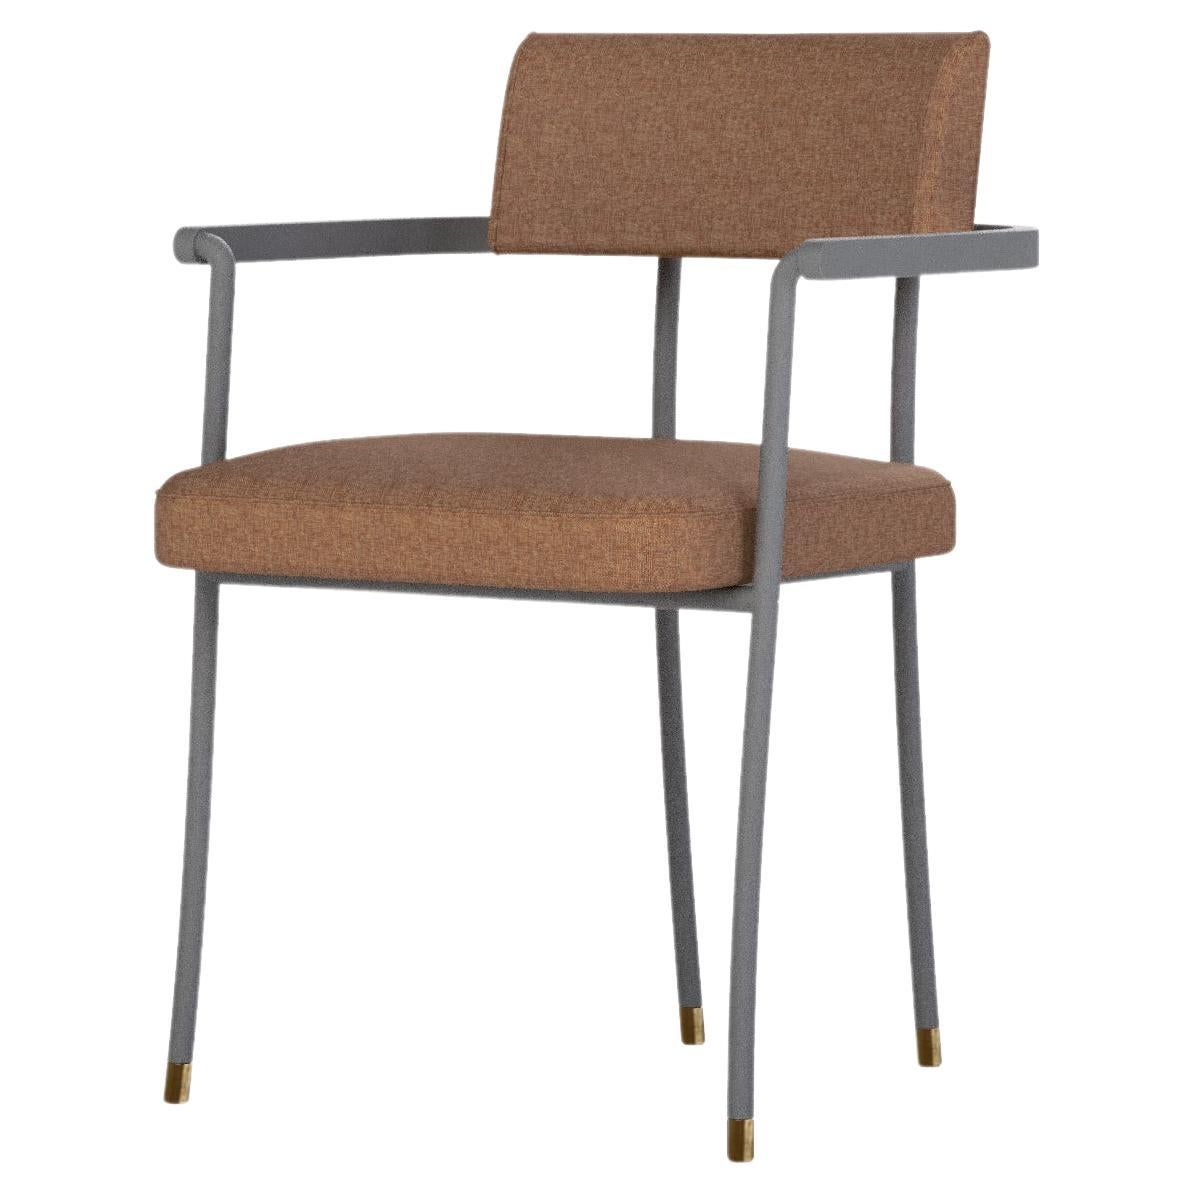 Upholstery Dining Chair, Metal with Antique Plated Metal Details